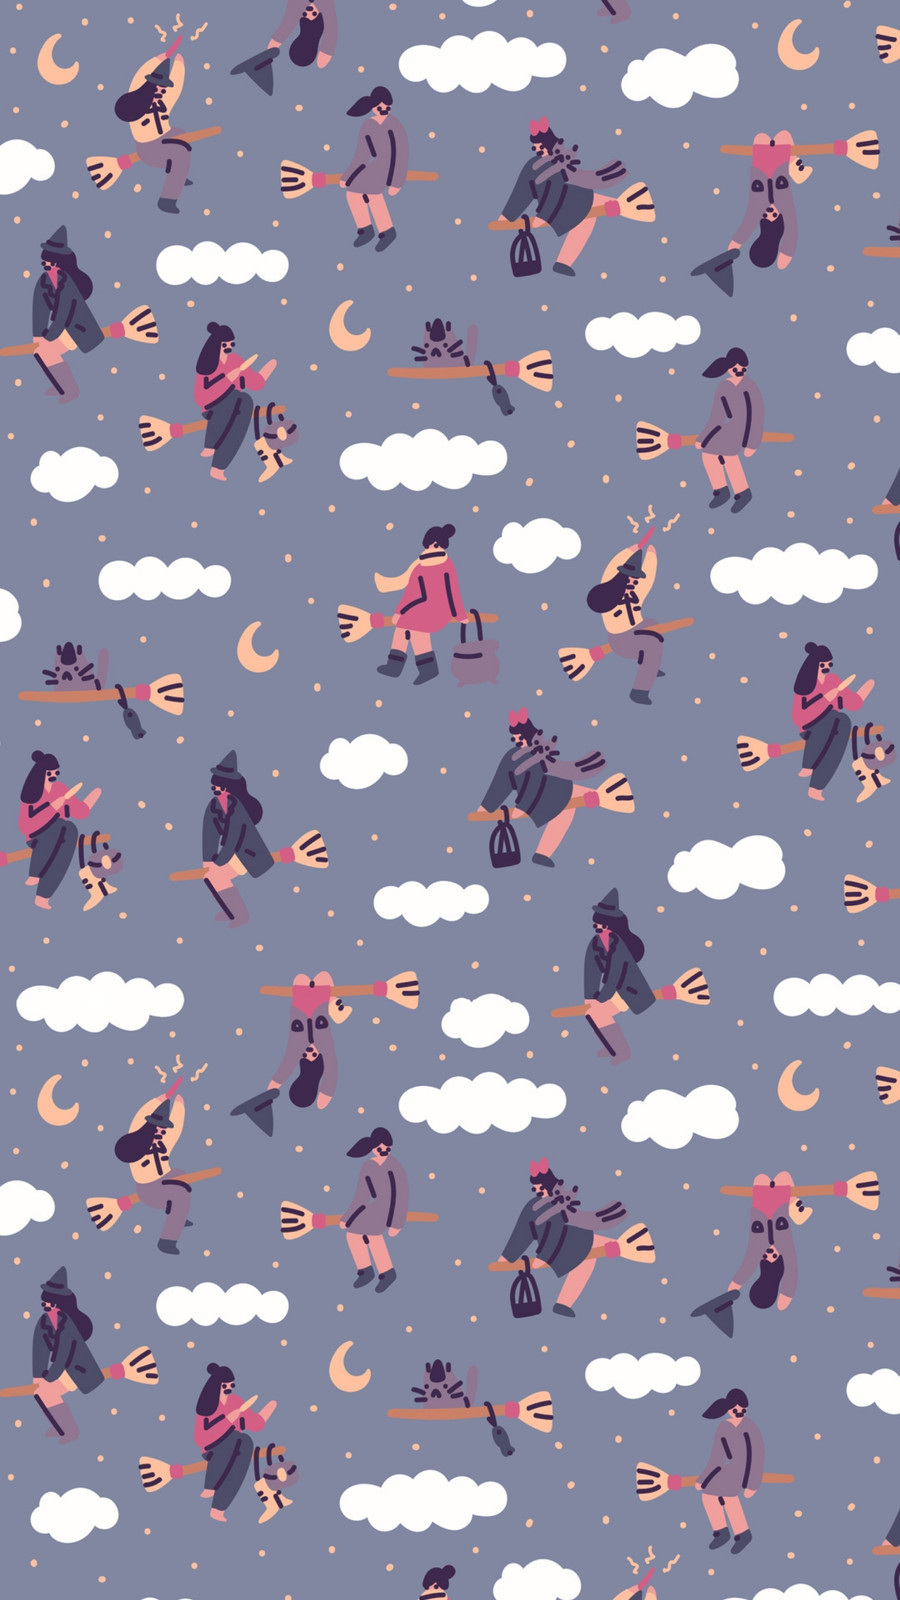 Some super cute witchy vibe backgrounds for your phone or computer    rWitchesVsPatriarchy